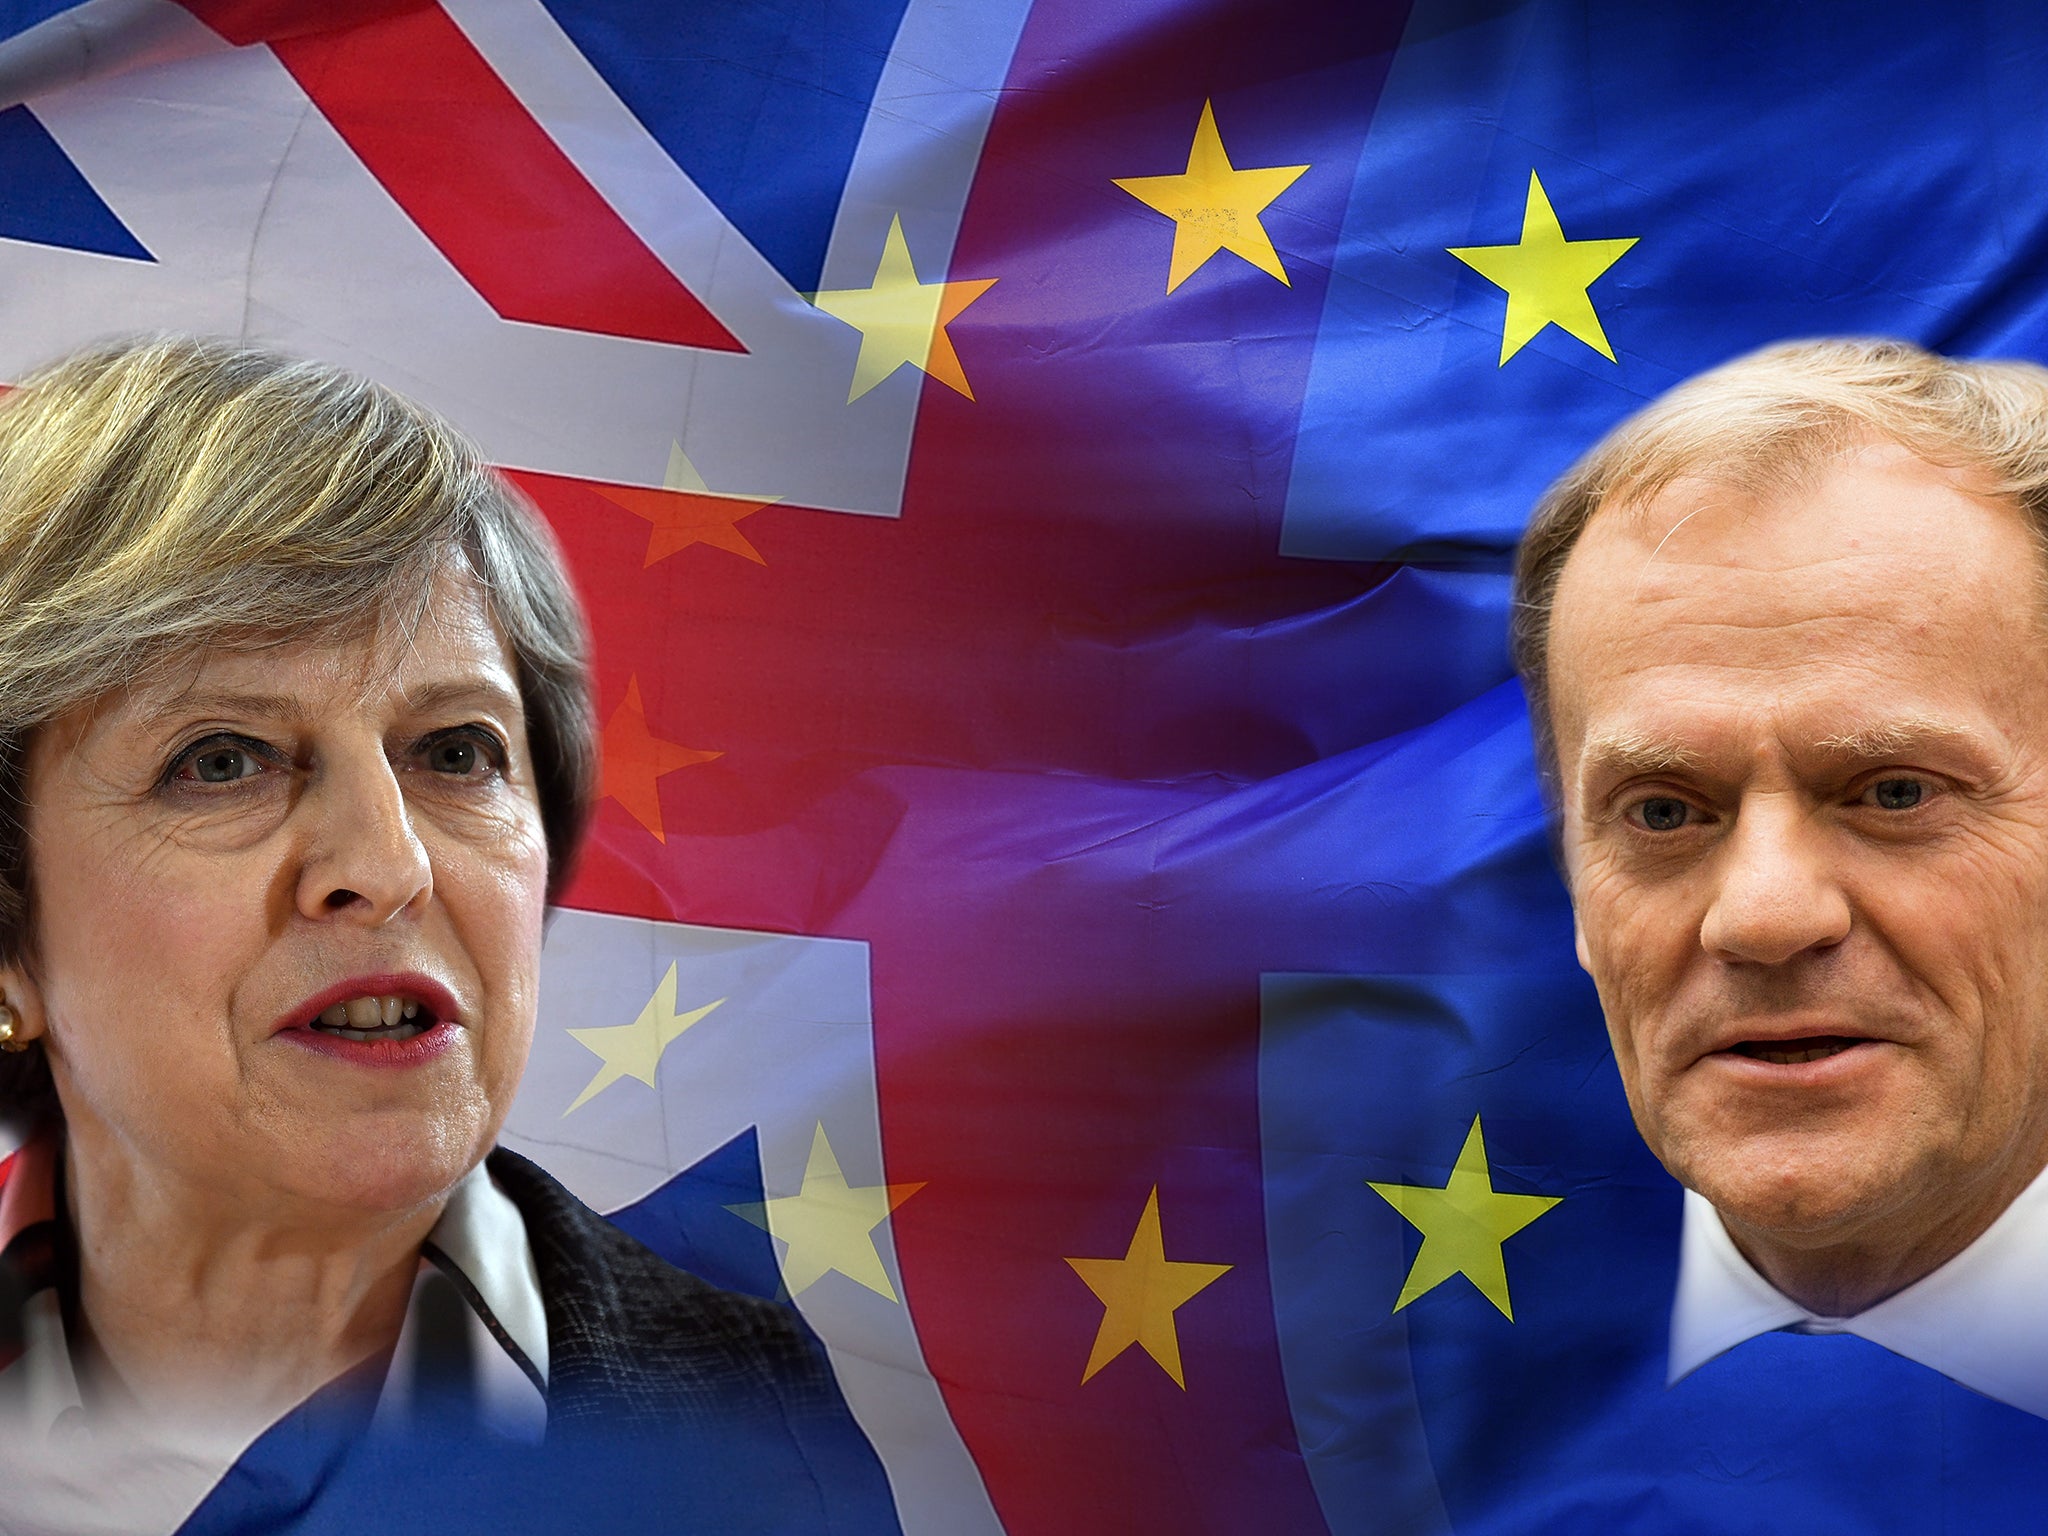 Prime Minister Theresa May and the President of the European Council, Donald Tusk, will now face tough negotiations – with Britain campaigning for an ever-harder Brexit